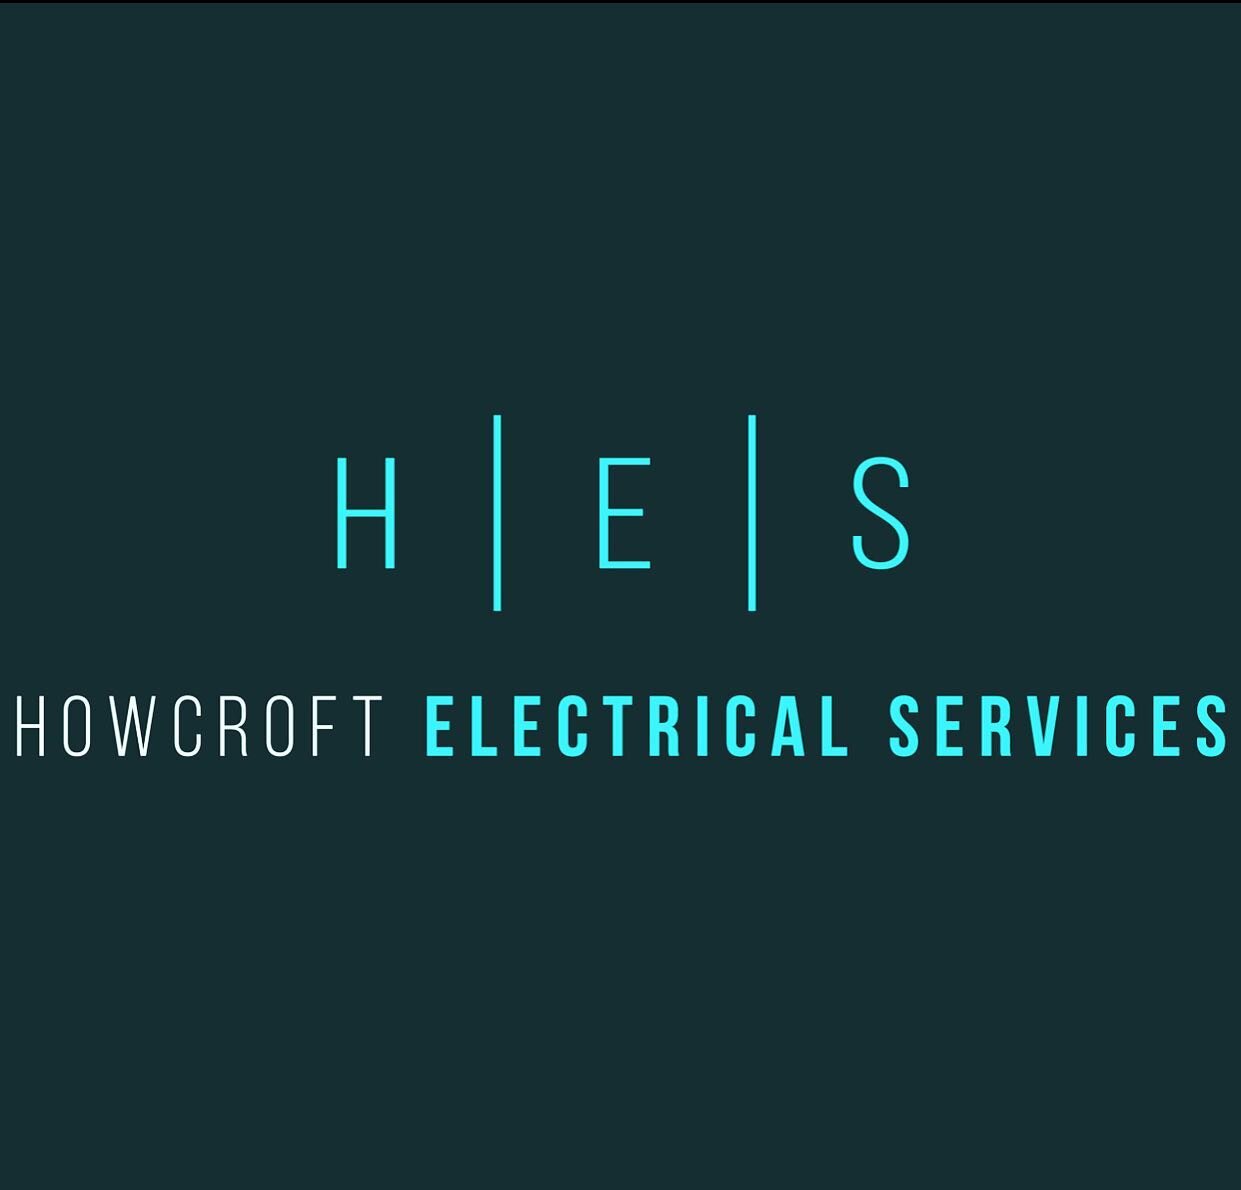 Howcroft Electrical Services 

We are a family owned Electrical business based in Ulladulla. We service from Nowra to Batemans Bay and specialise in Residential and Commercial installs. 

New Builds, renovations or minor upgrades - we do it all!